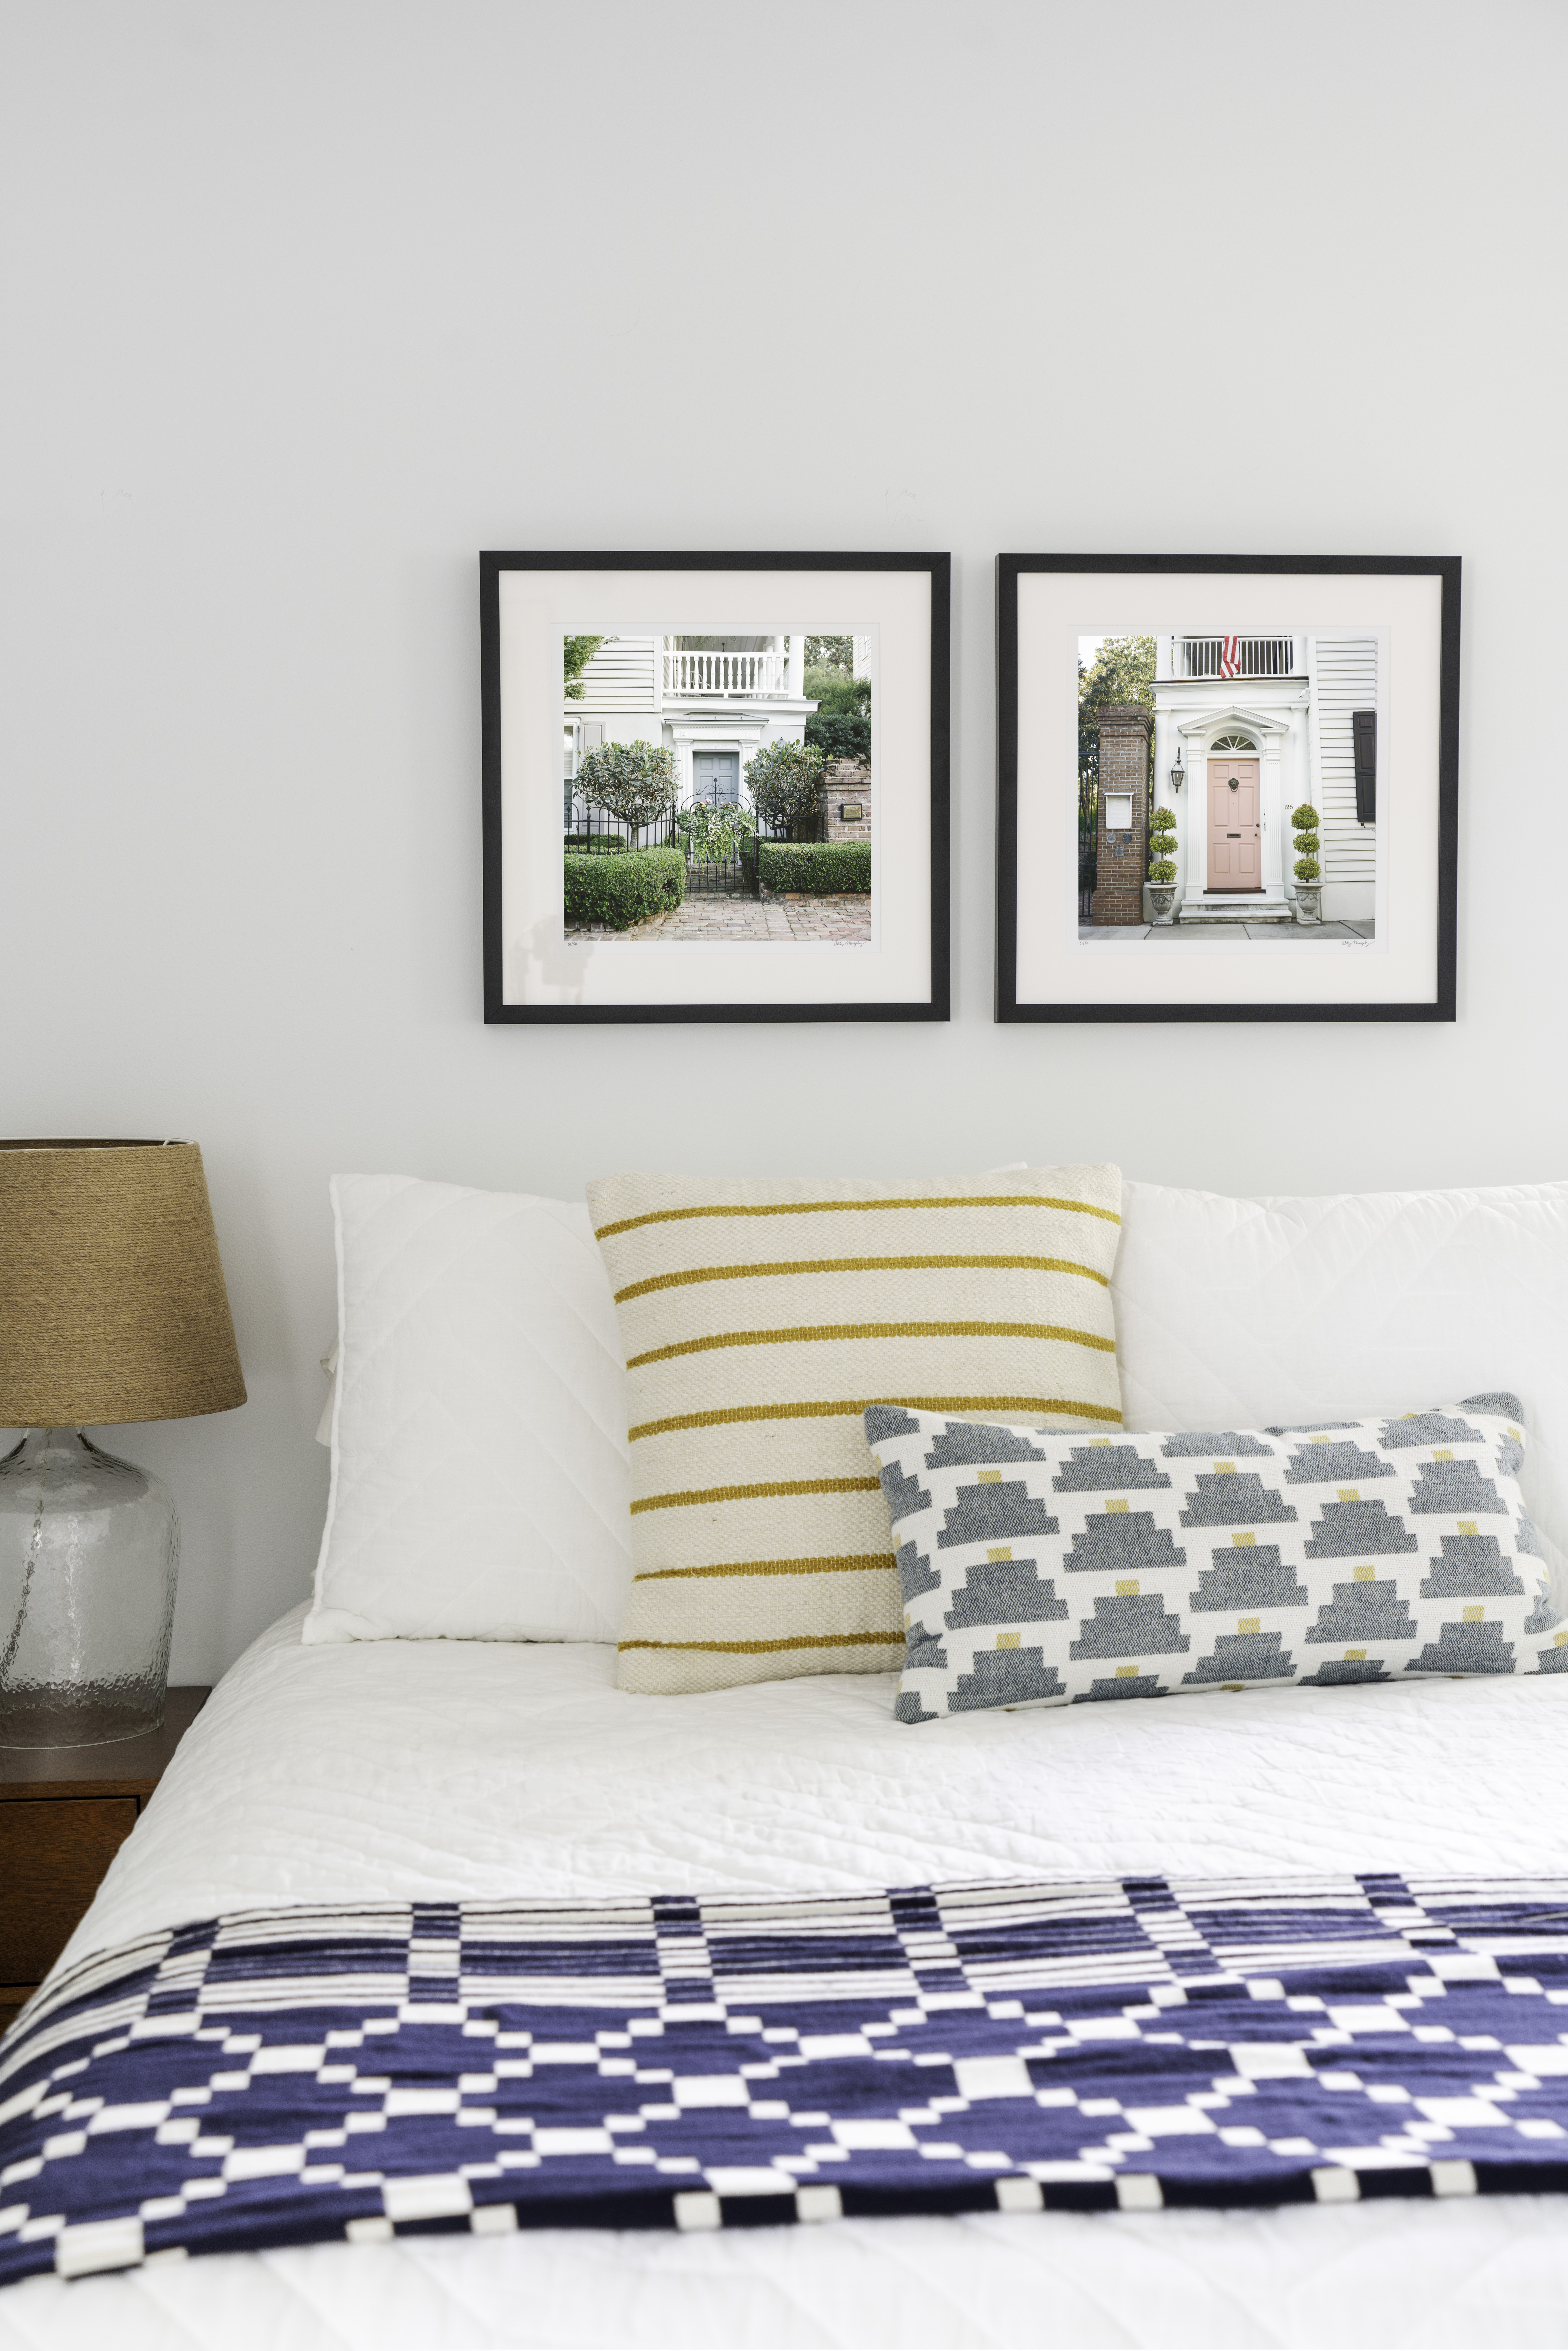 Two photographs of doors in Charleston, South Carolina hanging on the wall above a bed in black frames